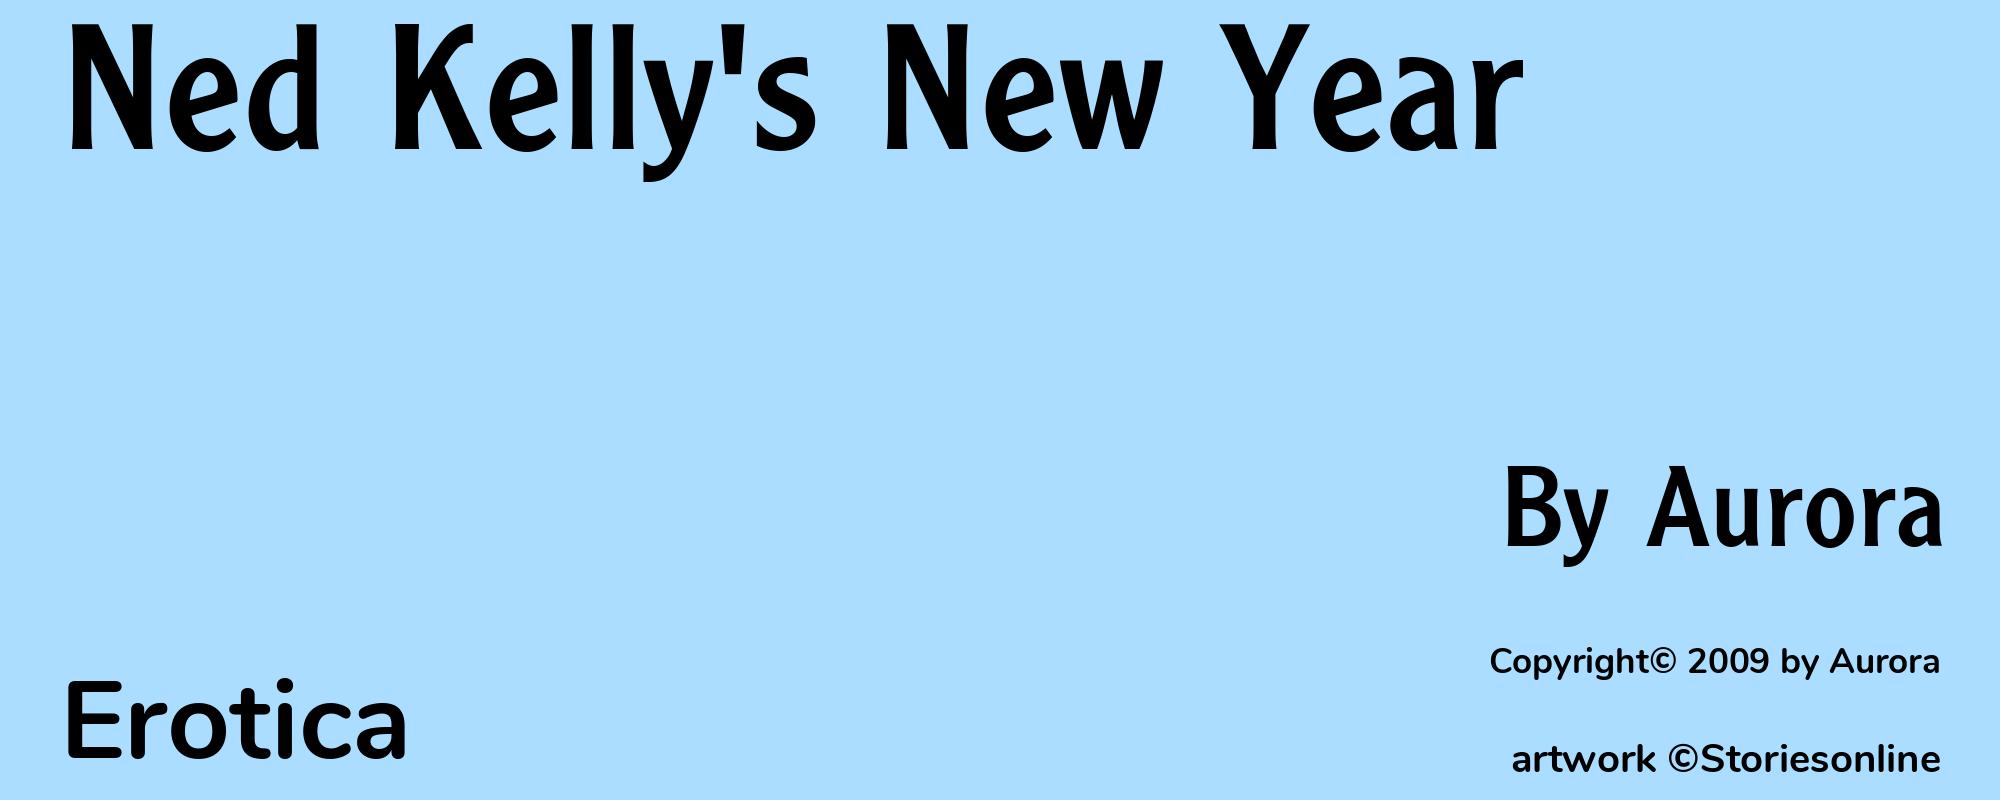 Ned Kelly's New Year - Cover